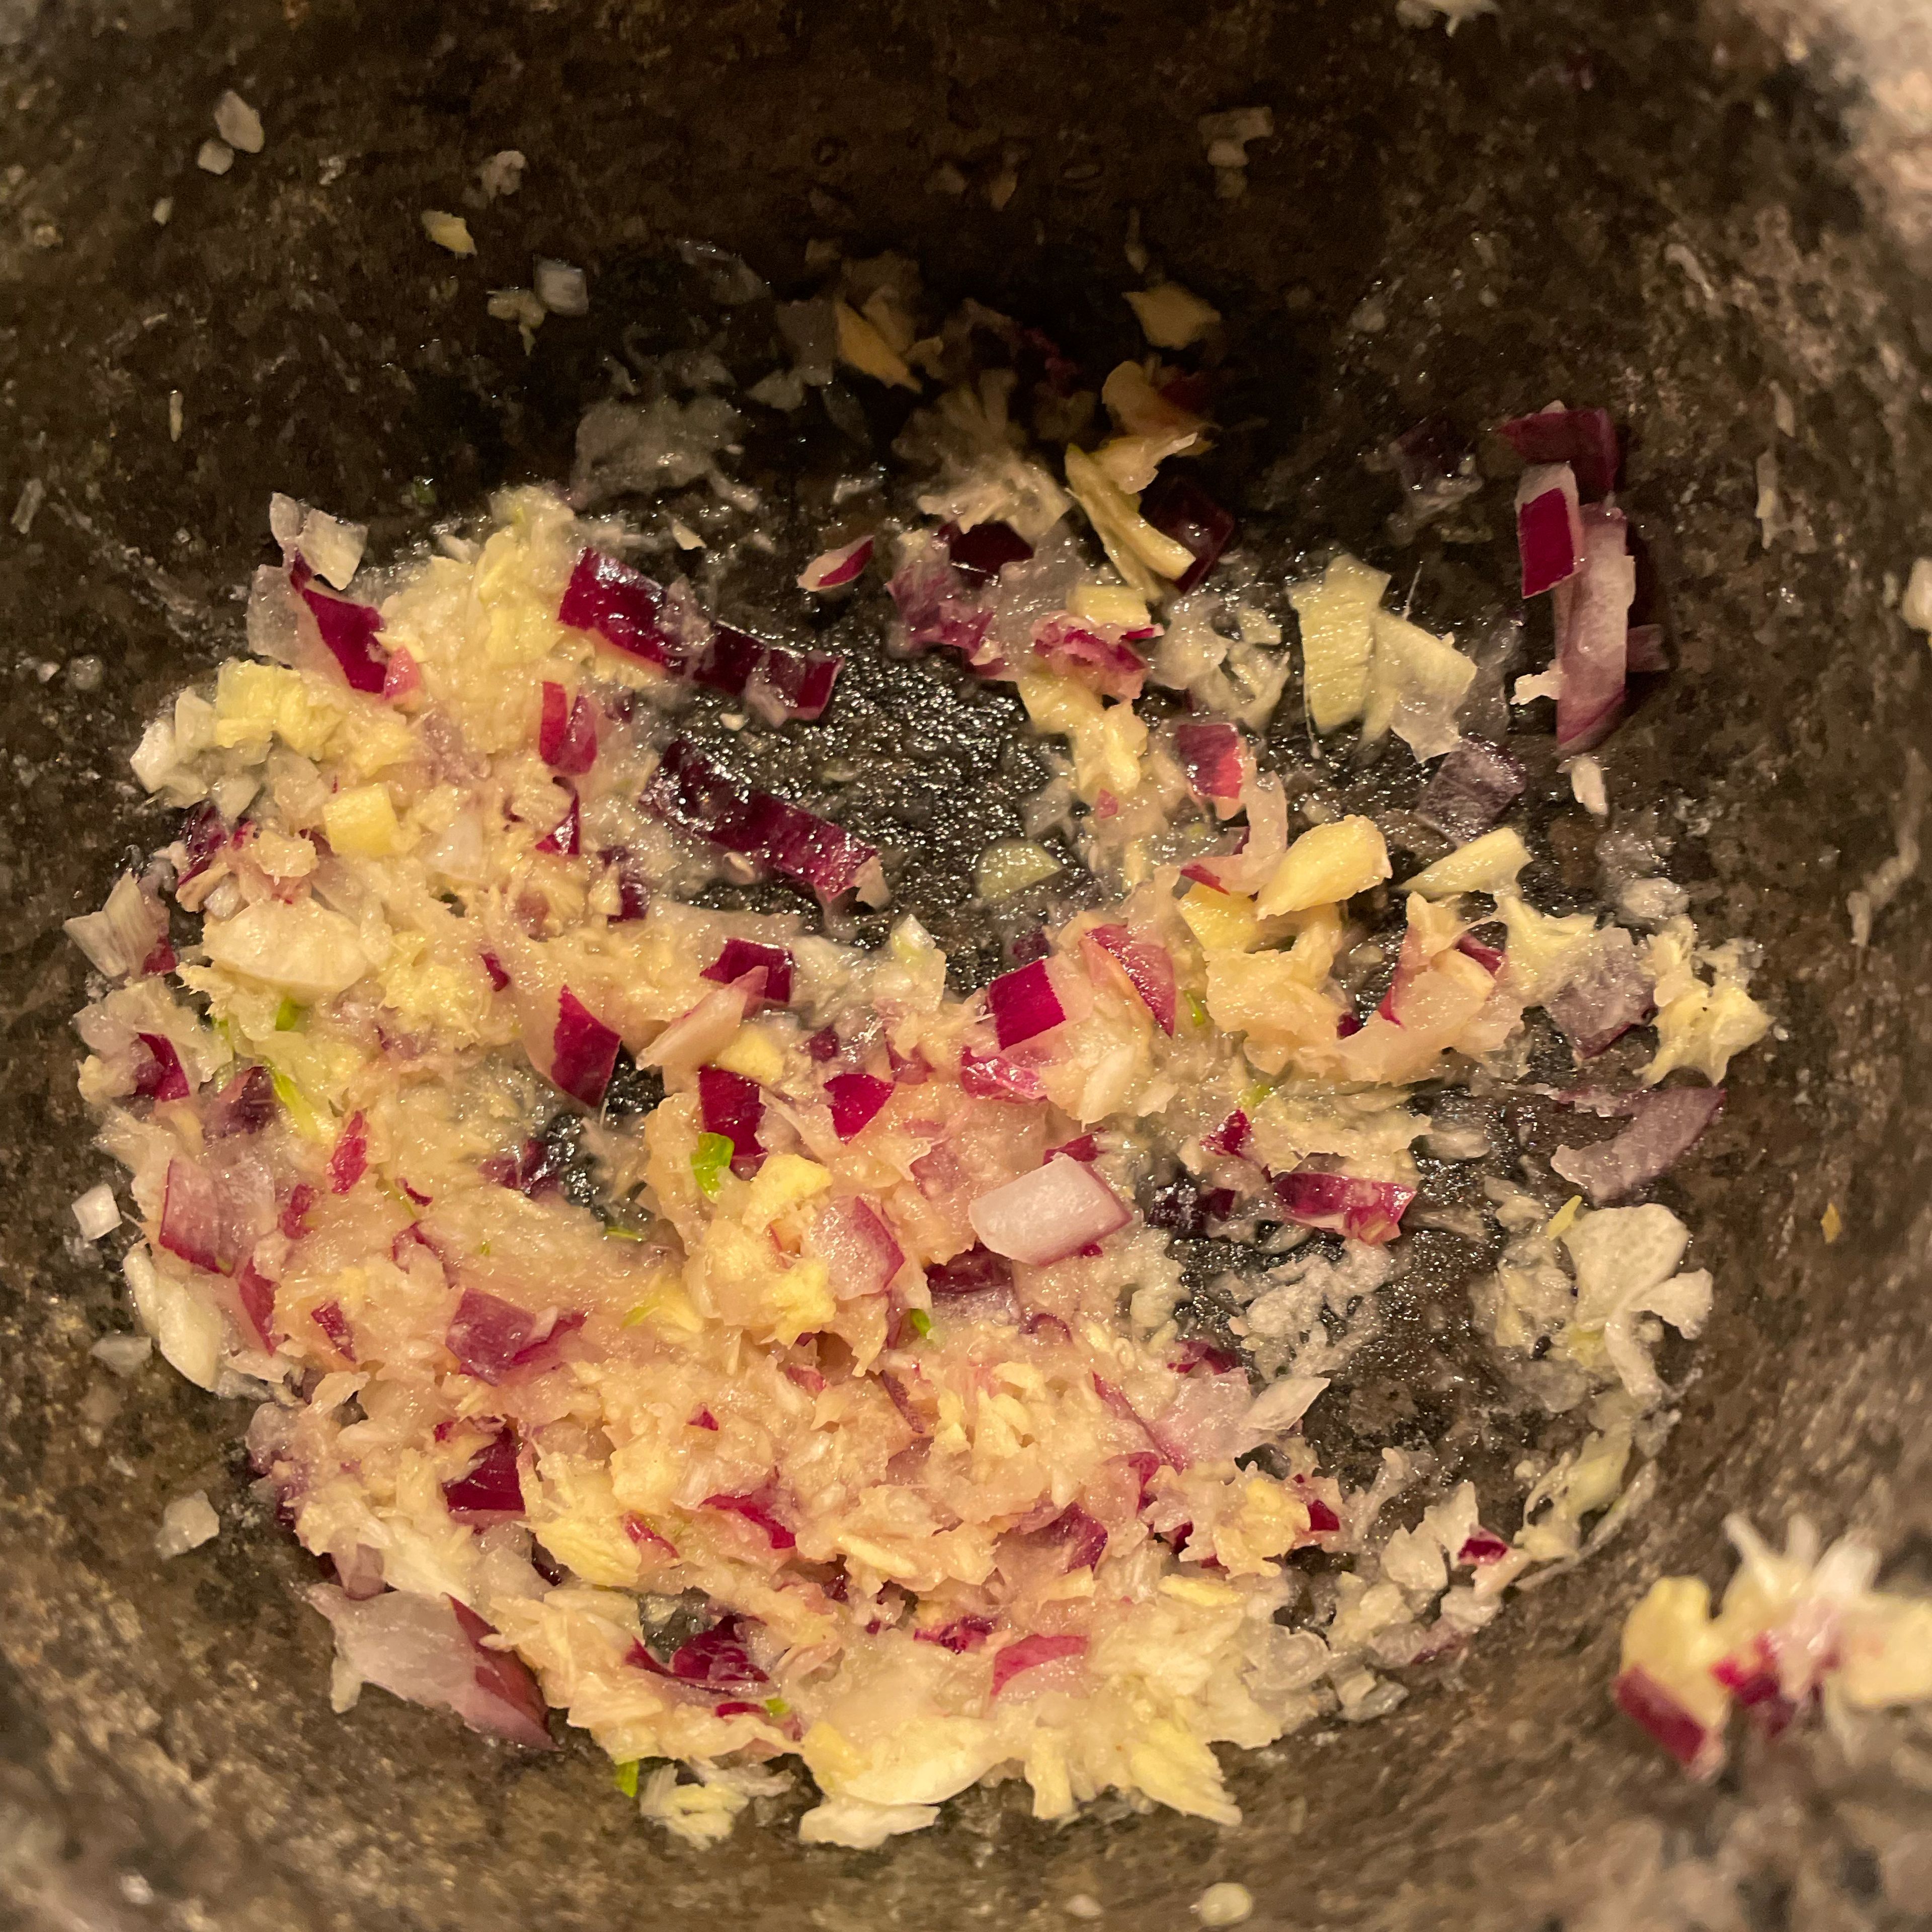 Pound remaining red onion, garlic and ginger with pestle and mortar to a paste.